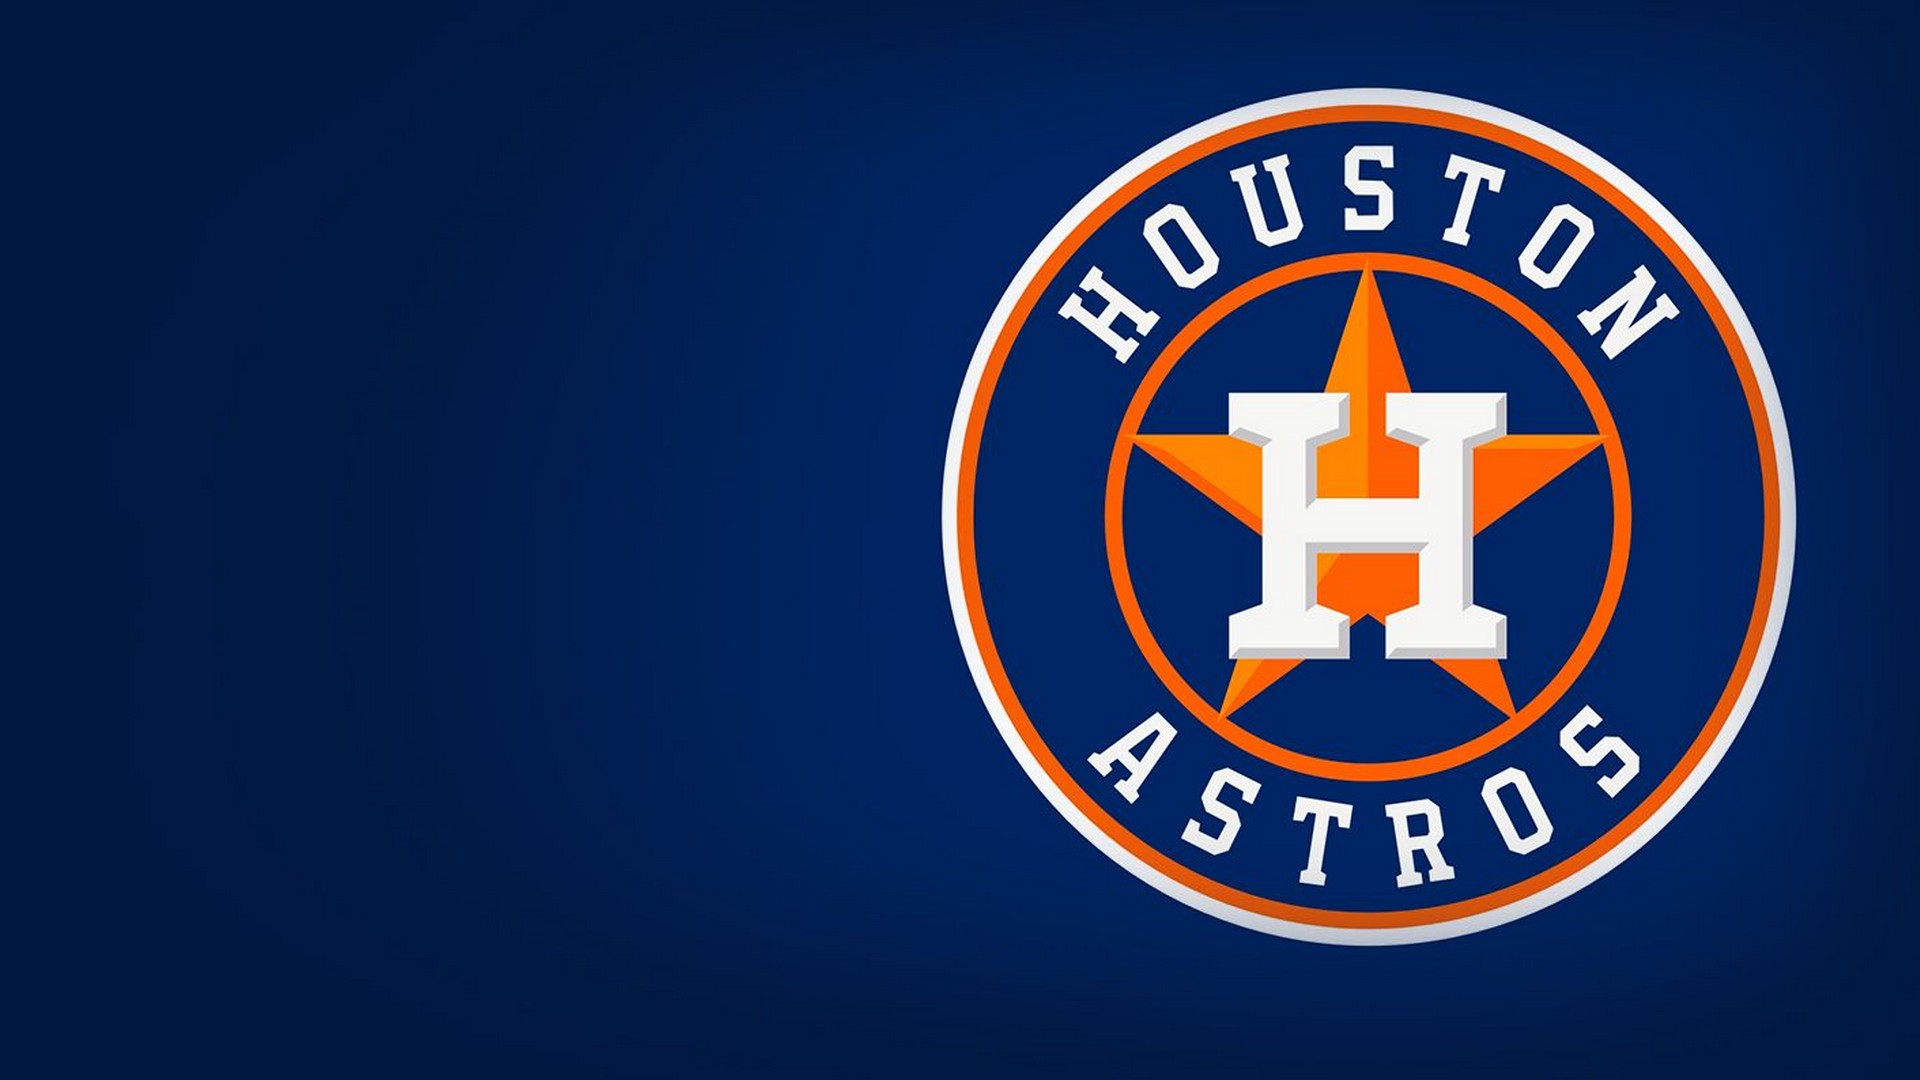 Wallpaper Desktop Houston Astros MLB HD With high-resolution 1920X1080 pixel. You can use this wallpaper for Mac Desktop Wallpaper, Laptop Screensavers, Android Wallpapers, Tablet or iPhone Home Screen and another mobile phone device